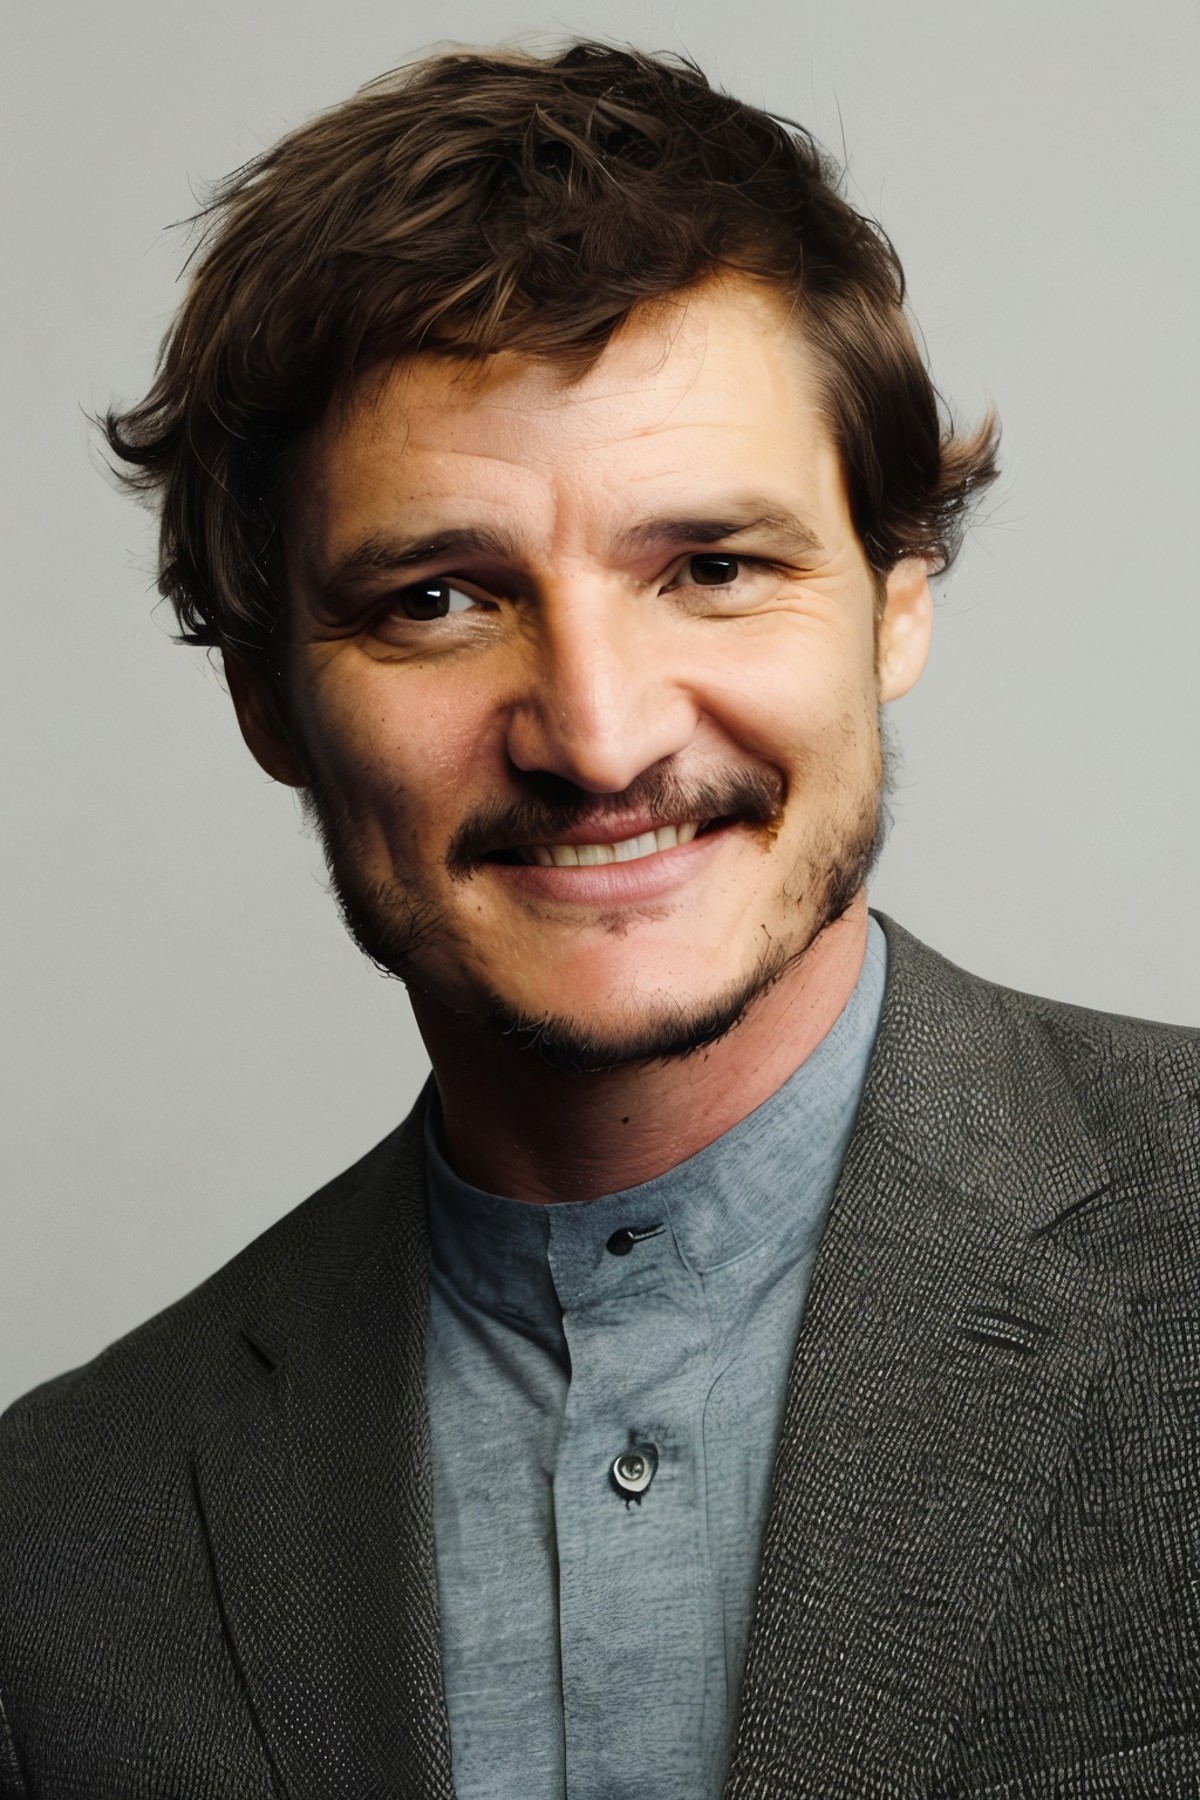 RAW shot, Pedro Pascal as a famous actor, <lora:PedroPascal:1>, smile, expressive emotions, fashion hairstyle, soft light,...